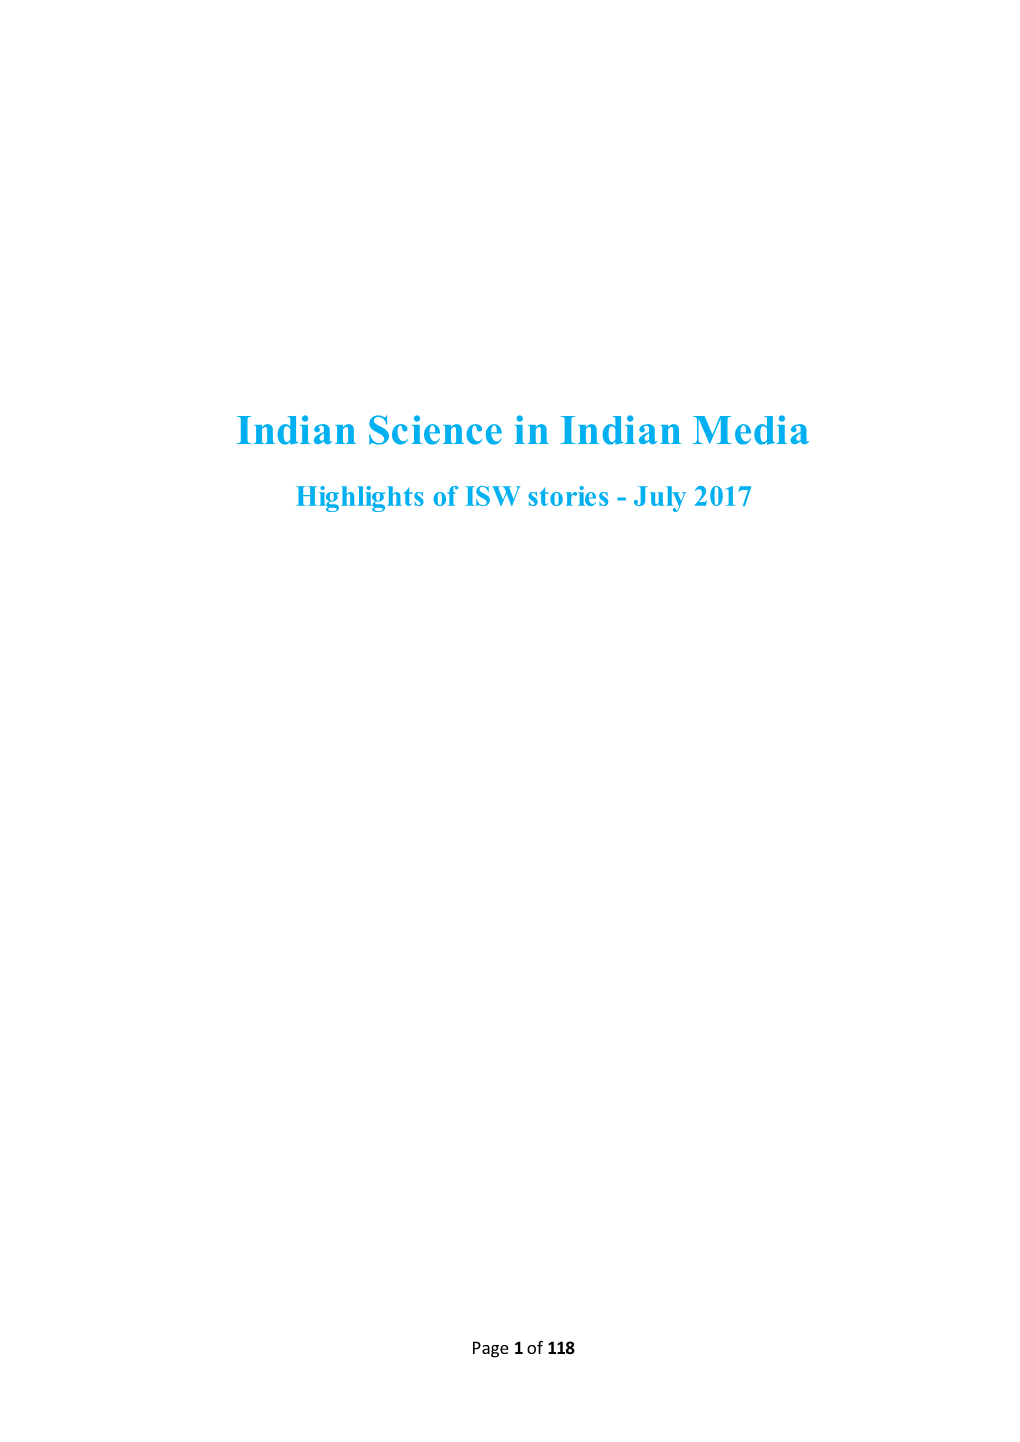 Indian Science in Indian Media Highlights of ISW Stories - July 2017